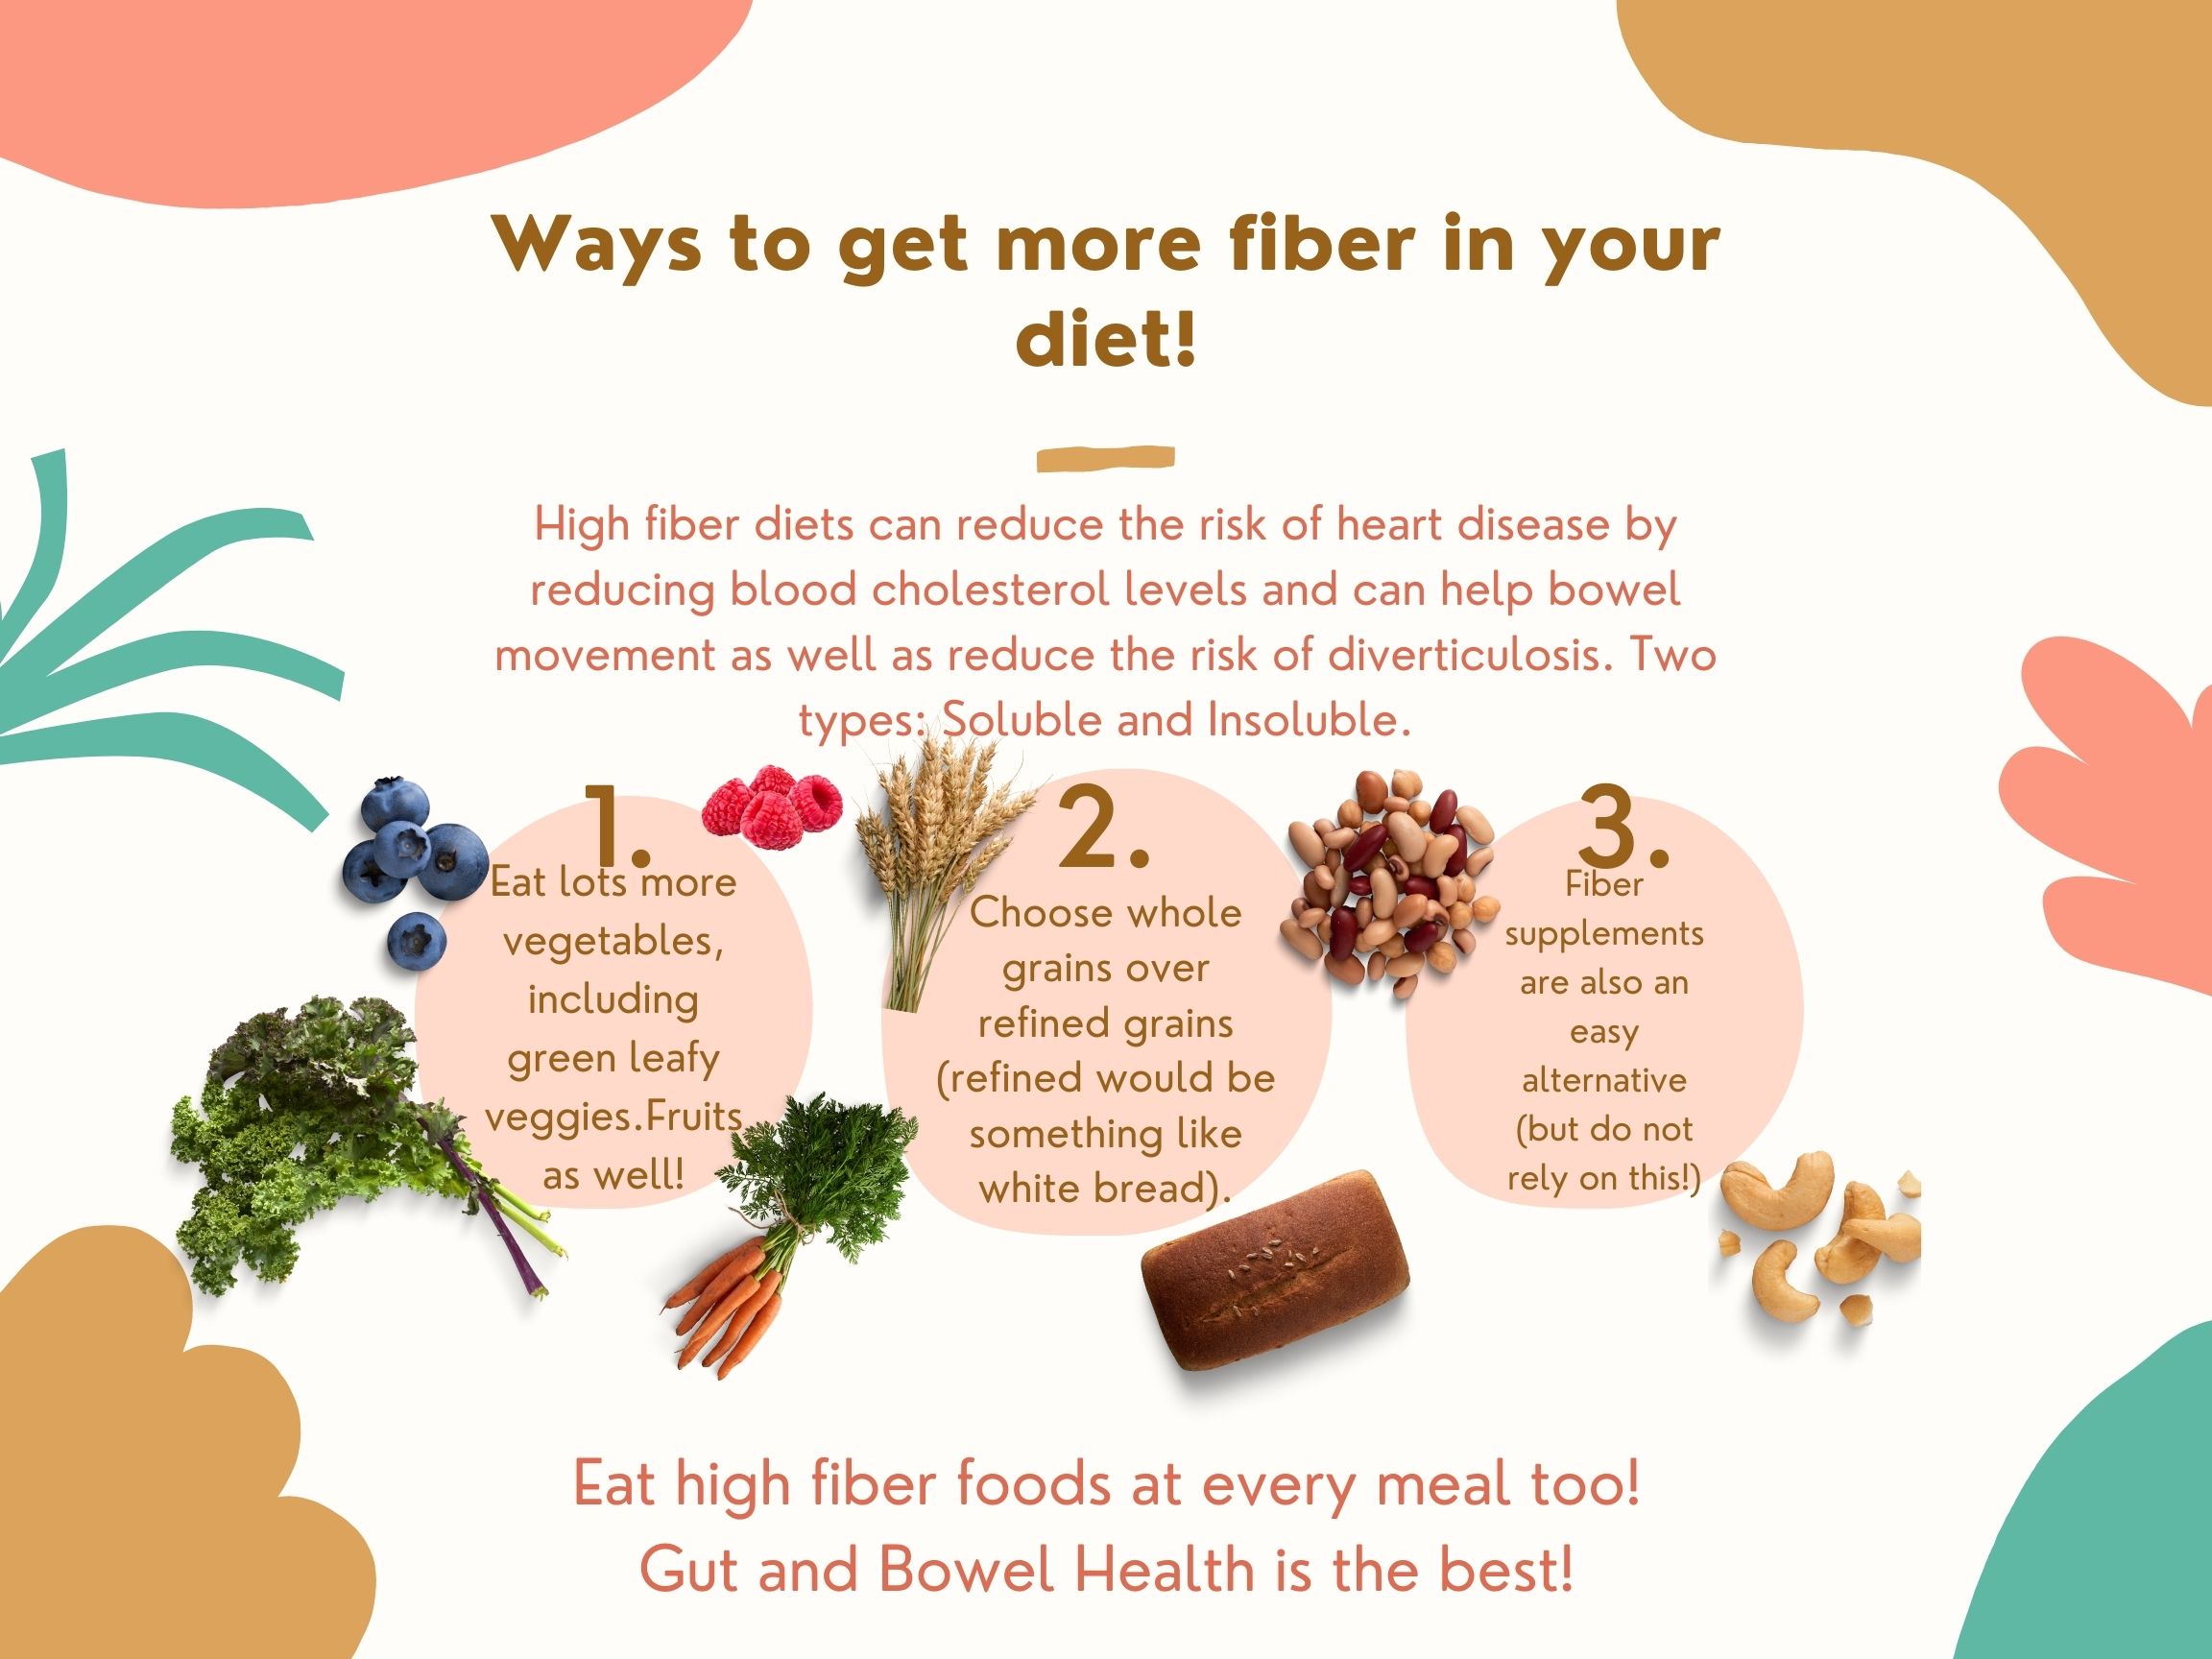 Infographic with ideas for getting more fiber in the diet. Ideas include eating fruits and vegetables, choosing whole grain options when possible, and supplementing with fiber if needed.